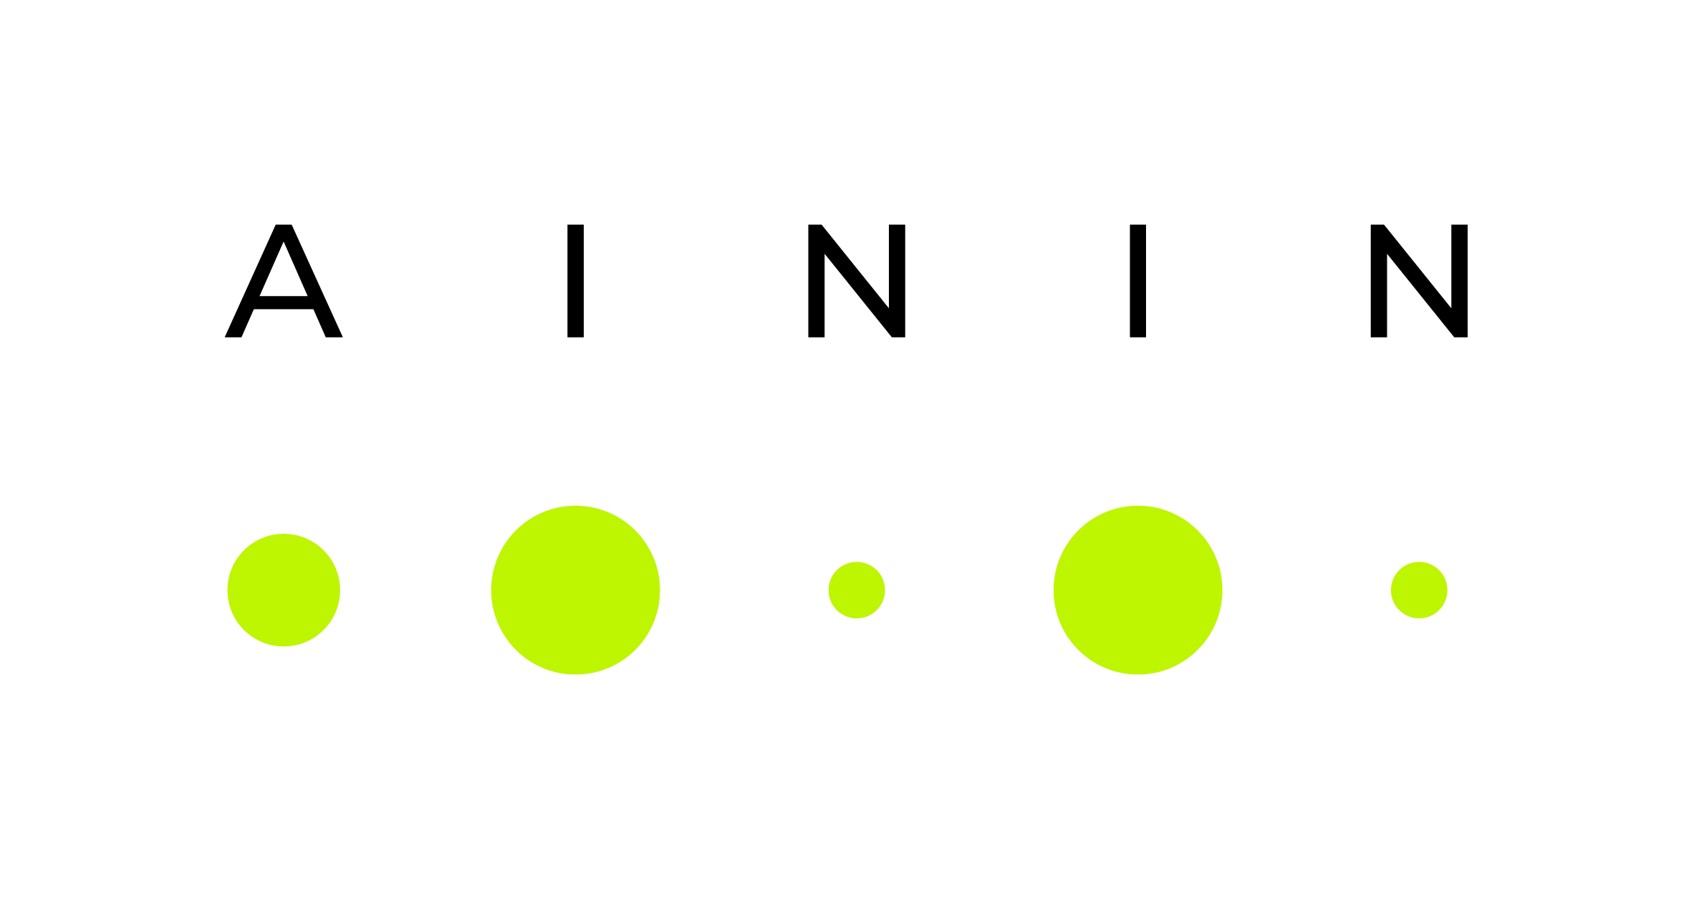 Showing the AININ logo with the letter AININ and neon green dots under it.